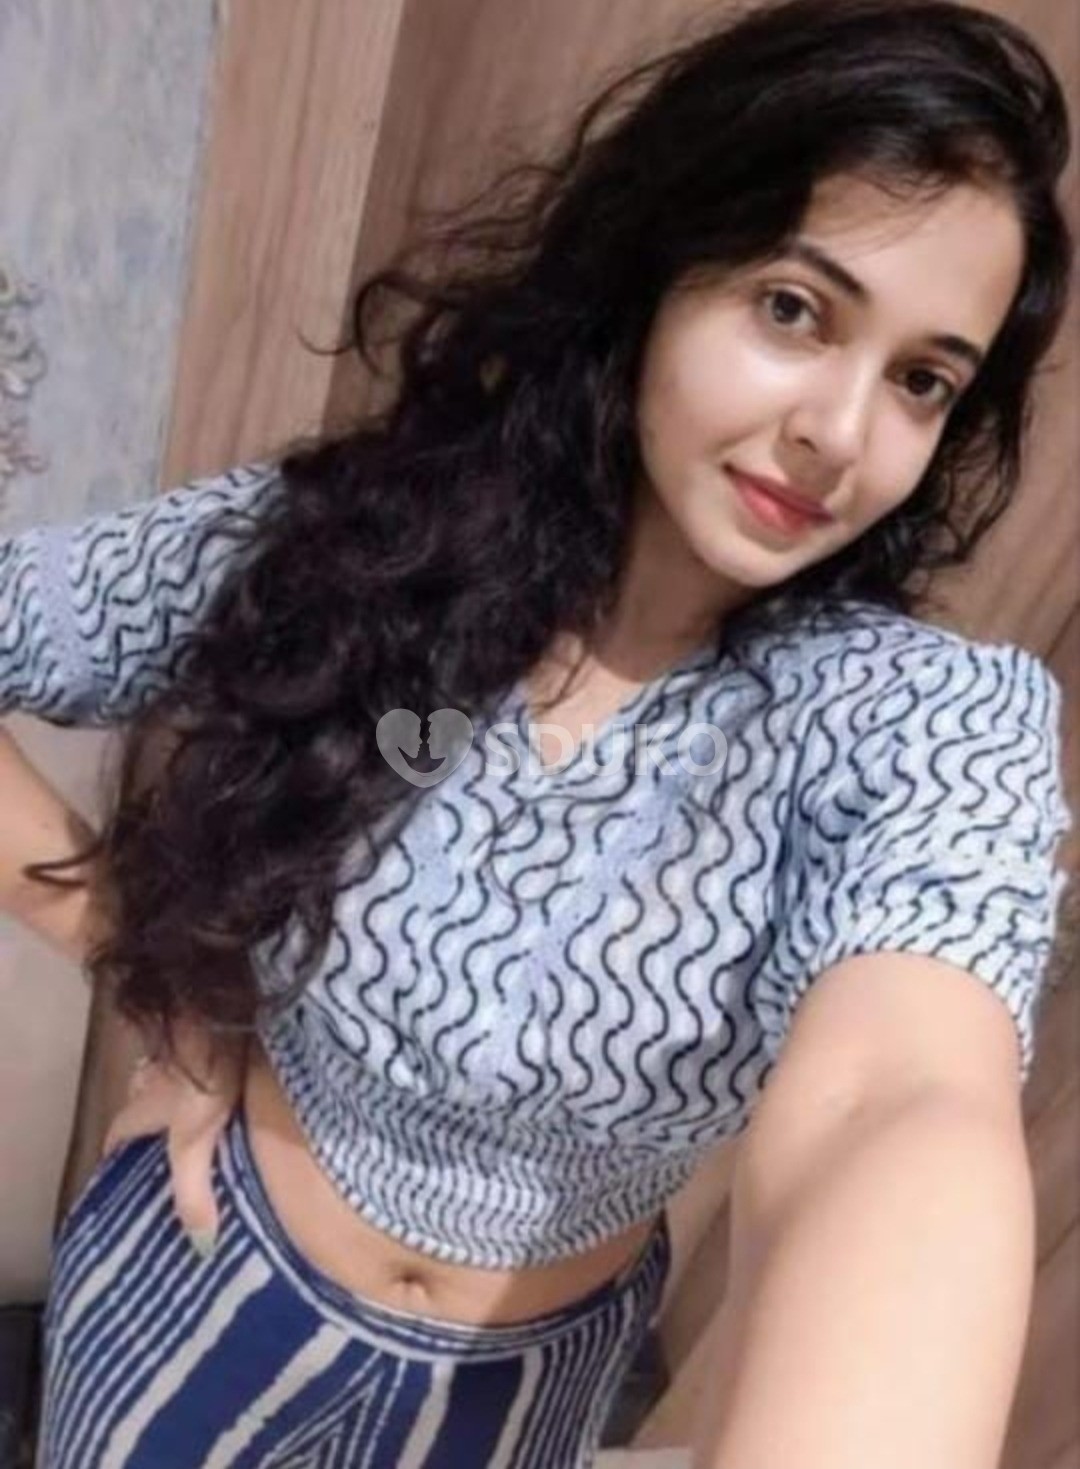 Greater Noida LOW PRICE🔸p✅( 24×7 ) SERVICE A AVAILABLE 100% SAFE AND S SECURE UNLIMITED ENJOY HOT COLLEGE GIRL HOU